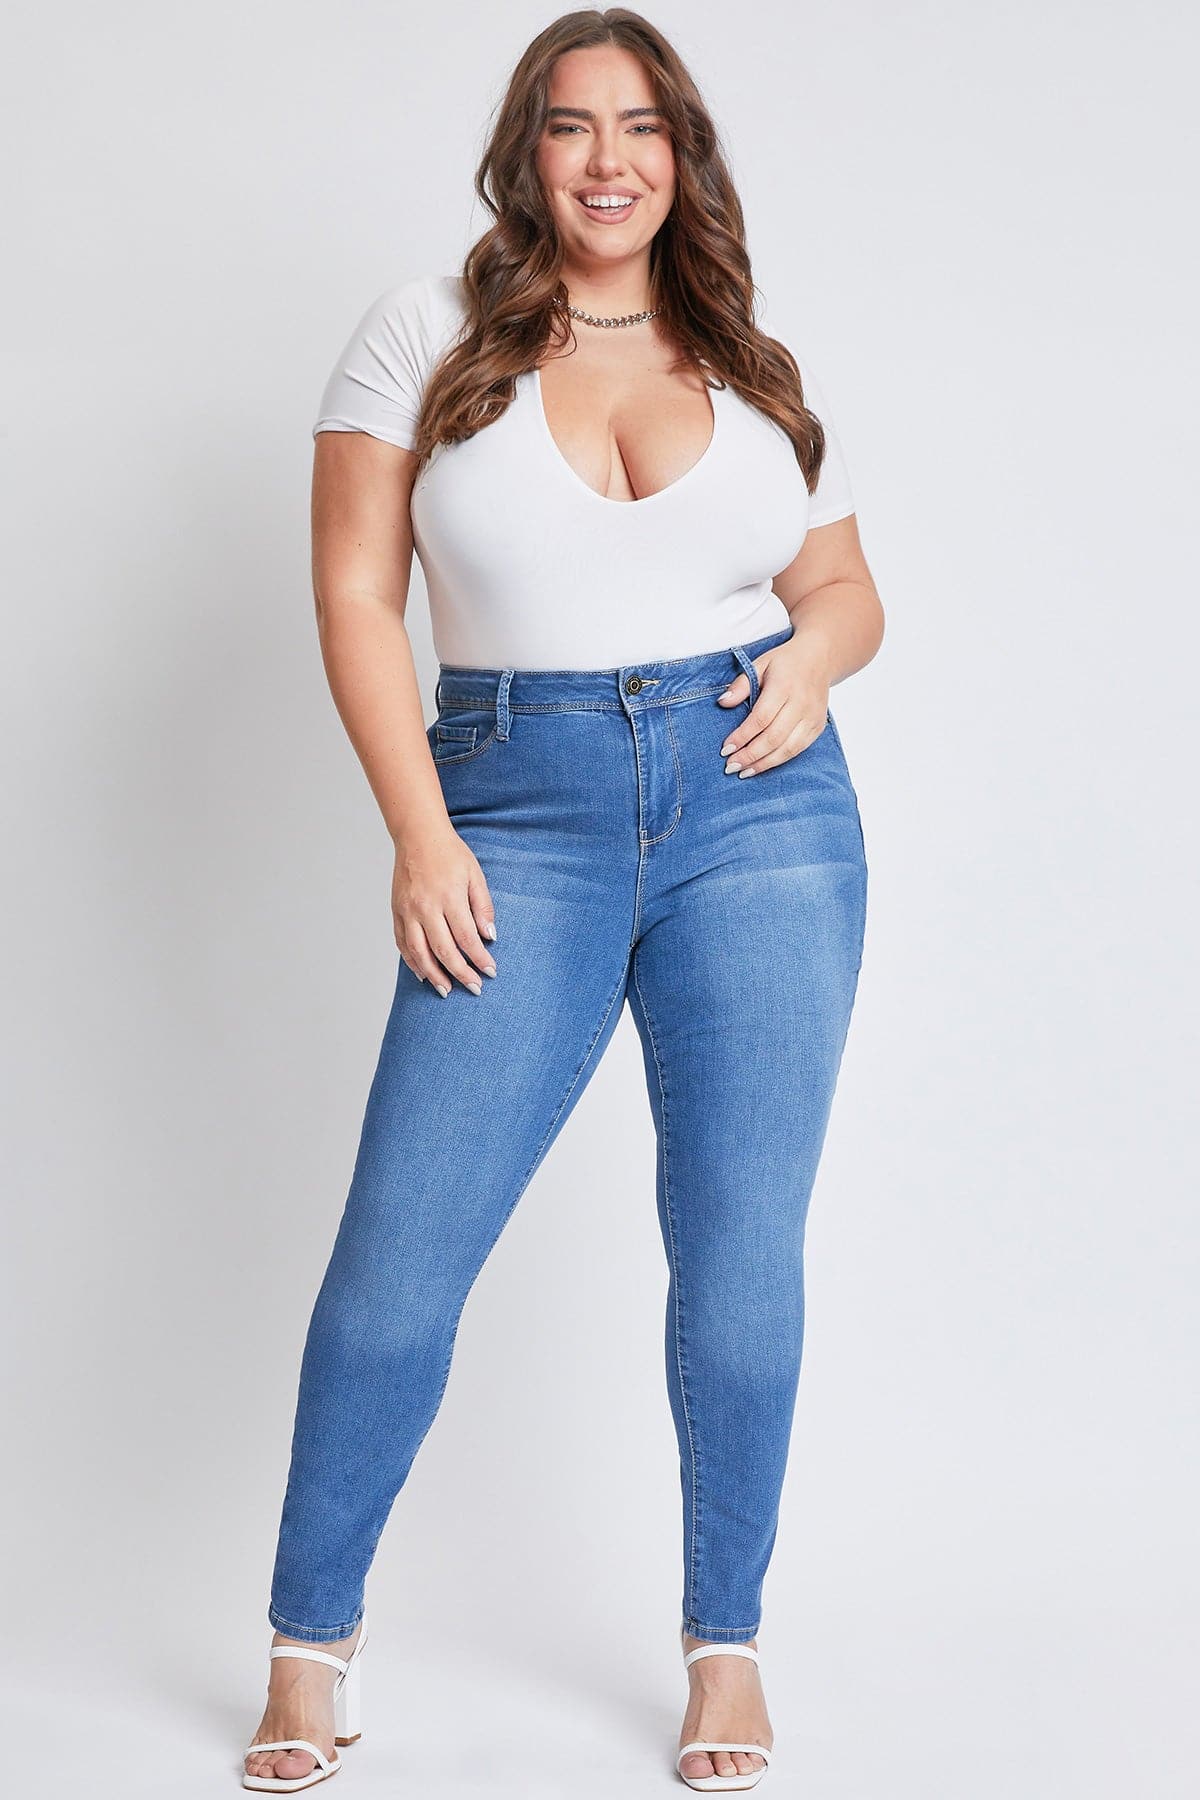 Plus Size Women's Essential Sustainable Skinny Jeans